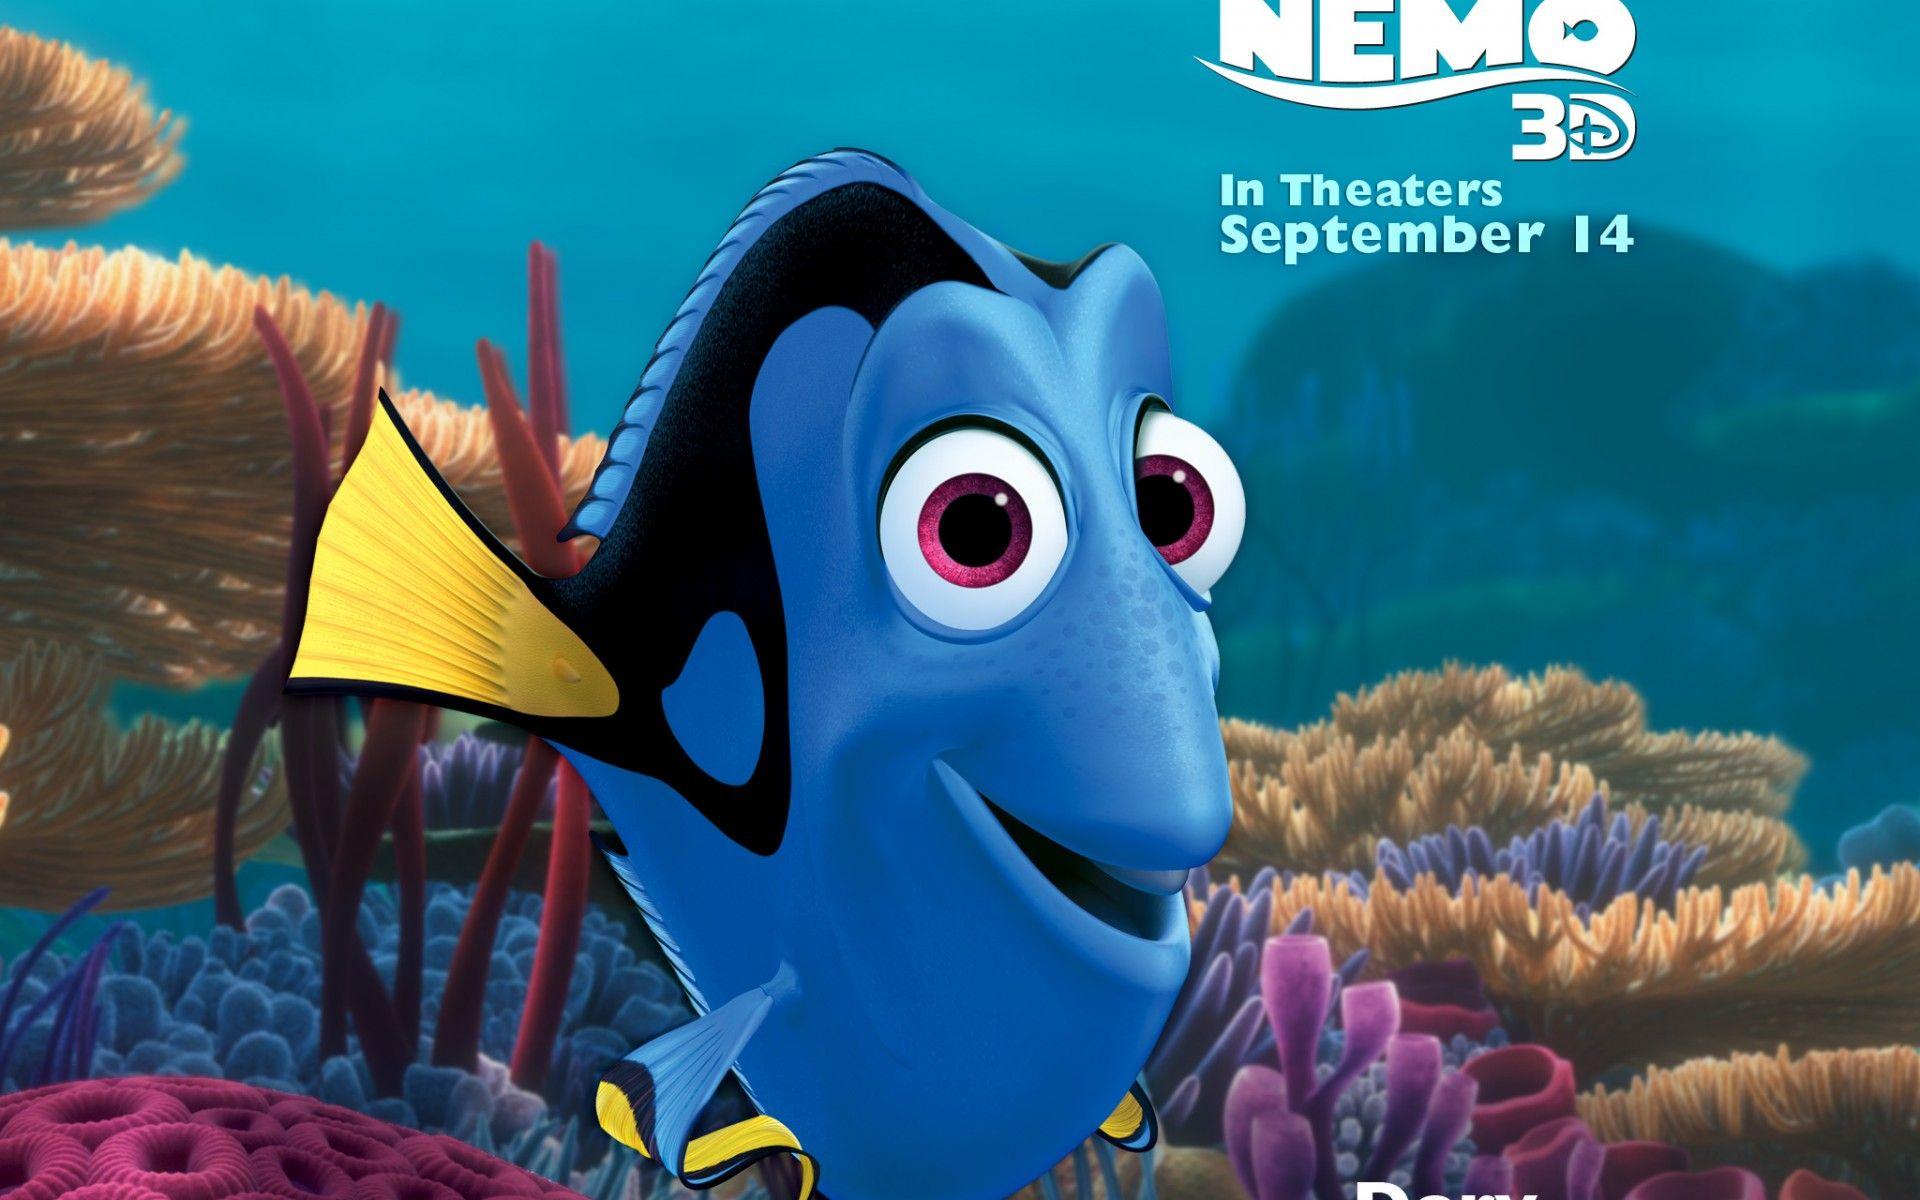 free for apple download Finding Nemo